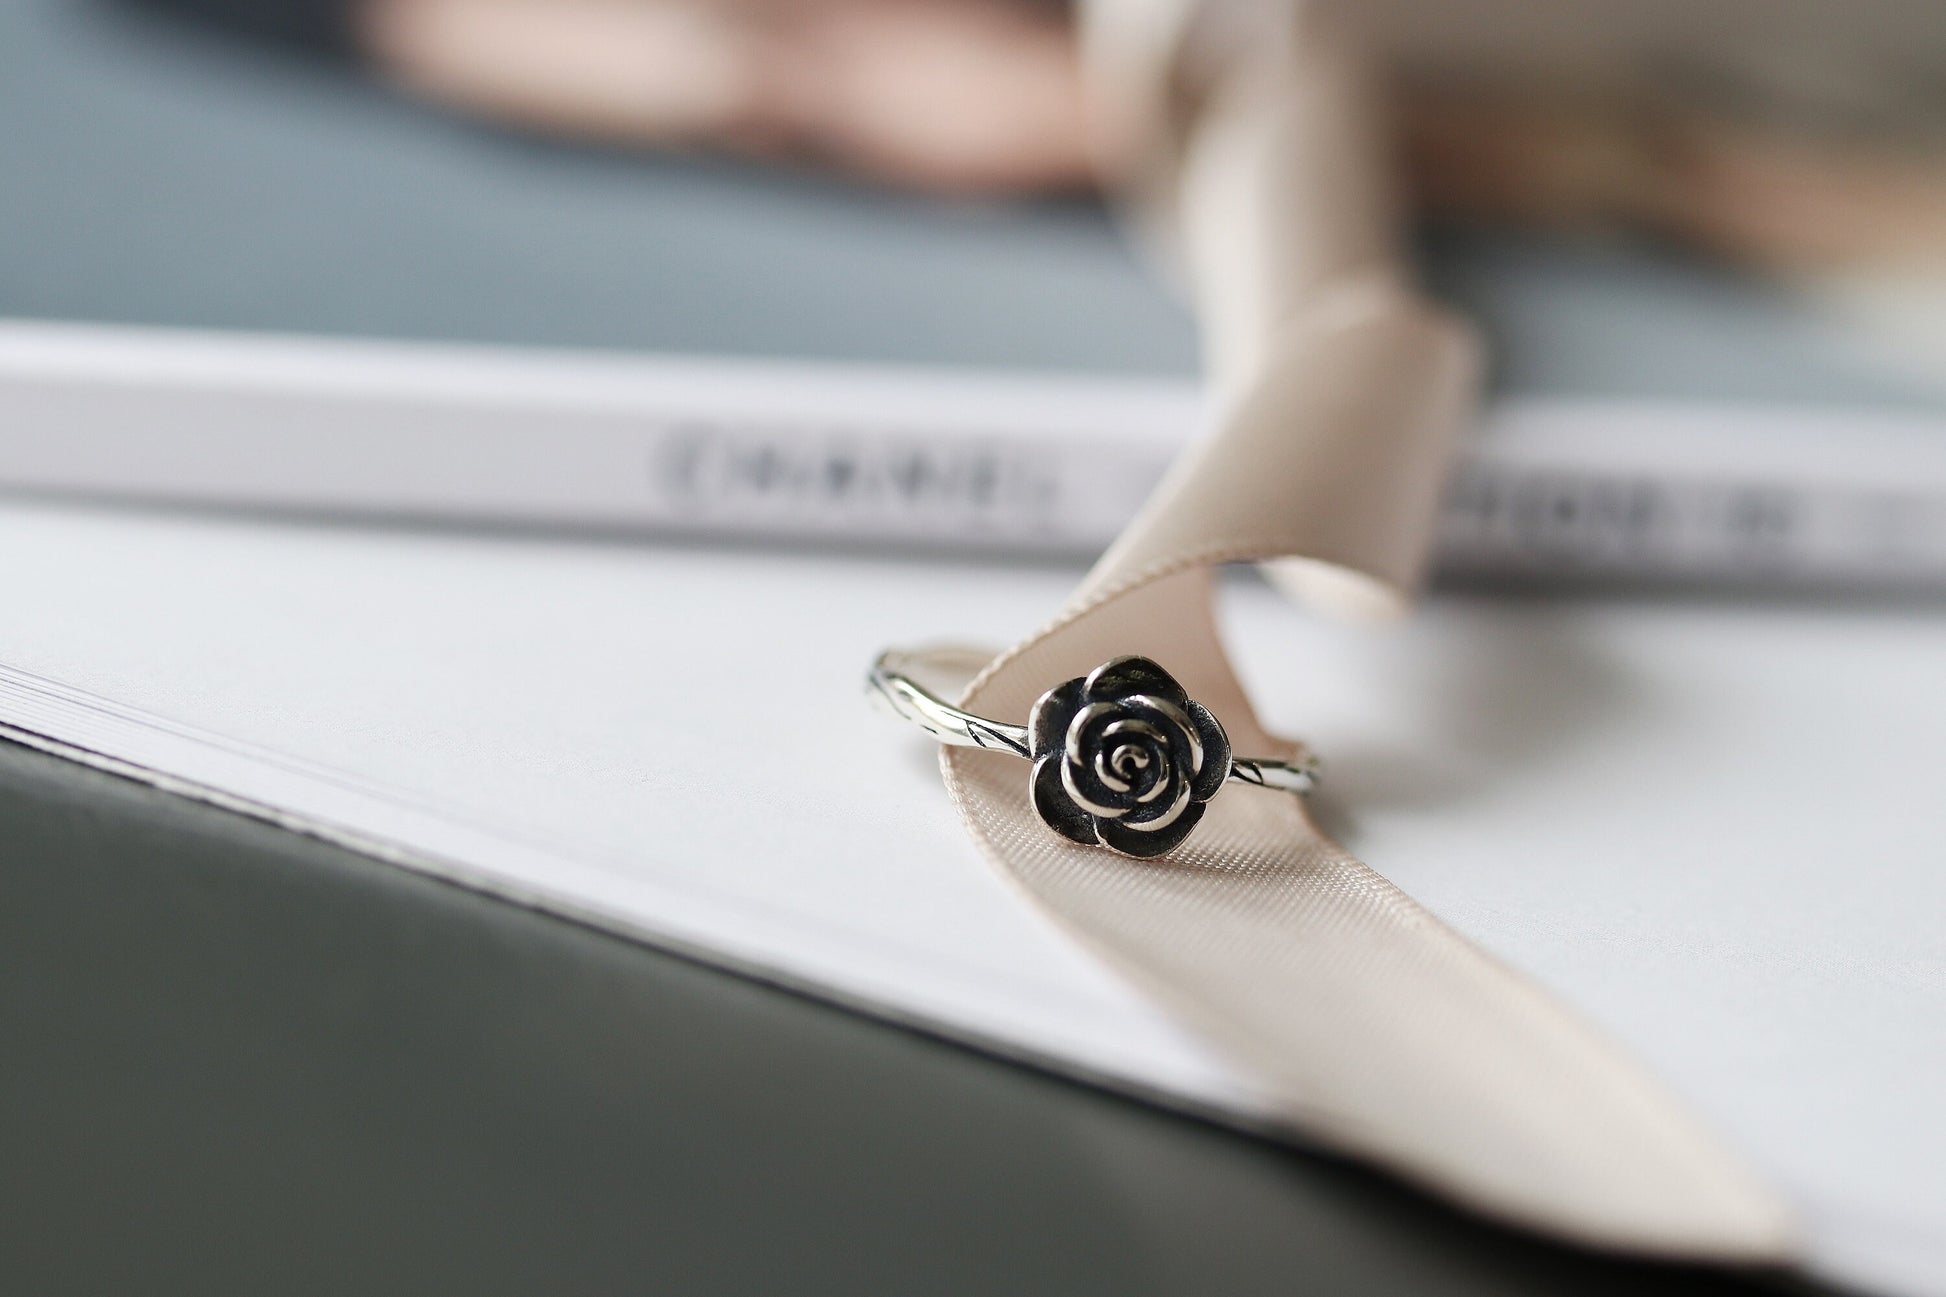 Solid Silver Handmade Rose Ring, Vintage Floral Open Ring, Modern Minimalist Adjustable Stacking Ring,Girlfriend Birthday Gift, Gift for Her